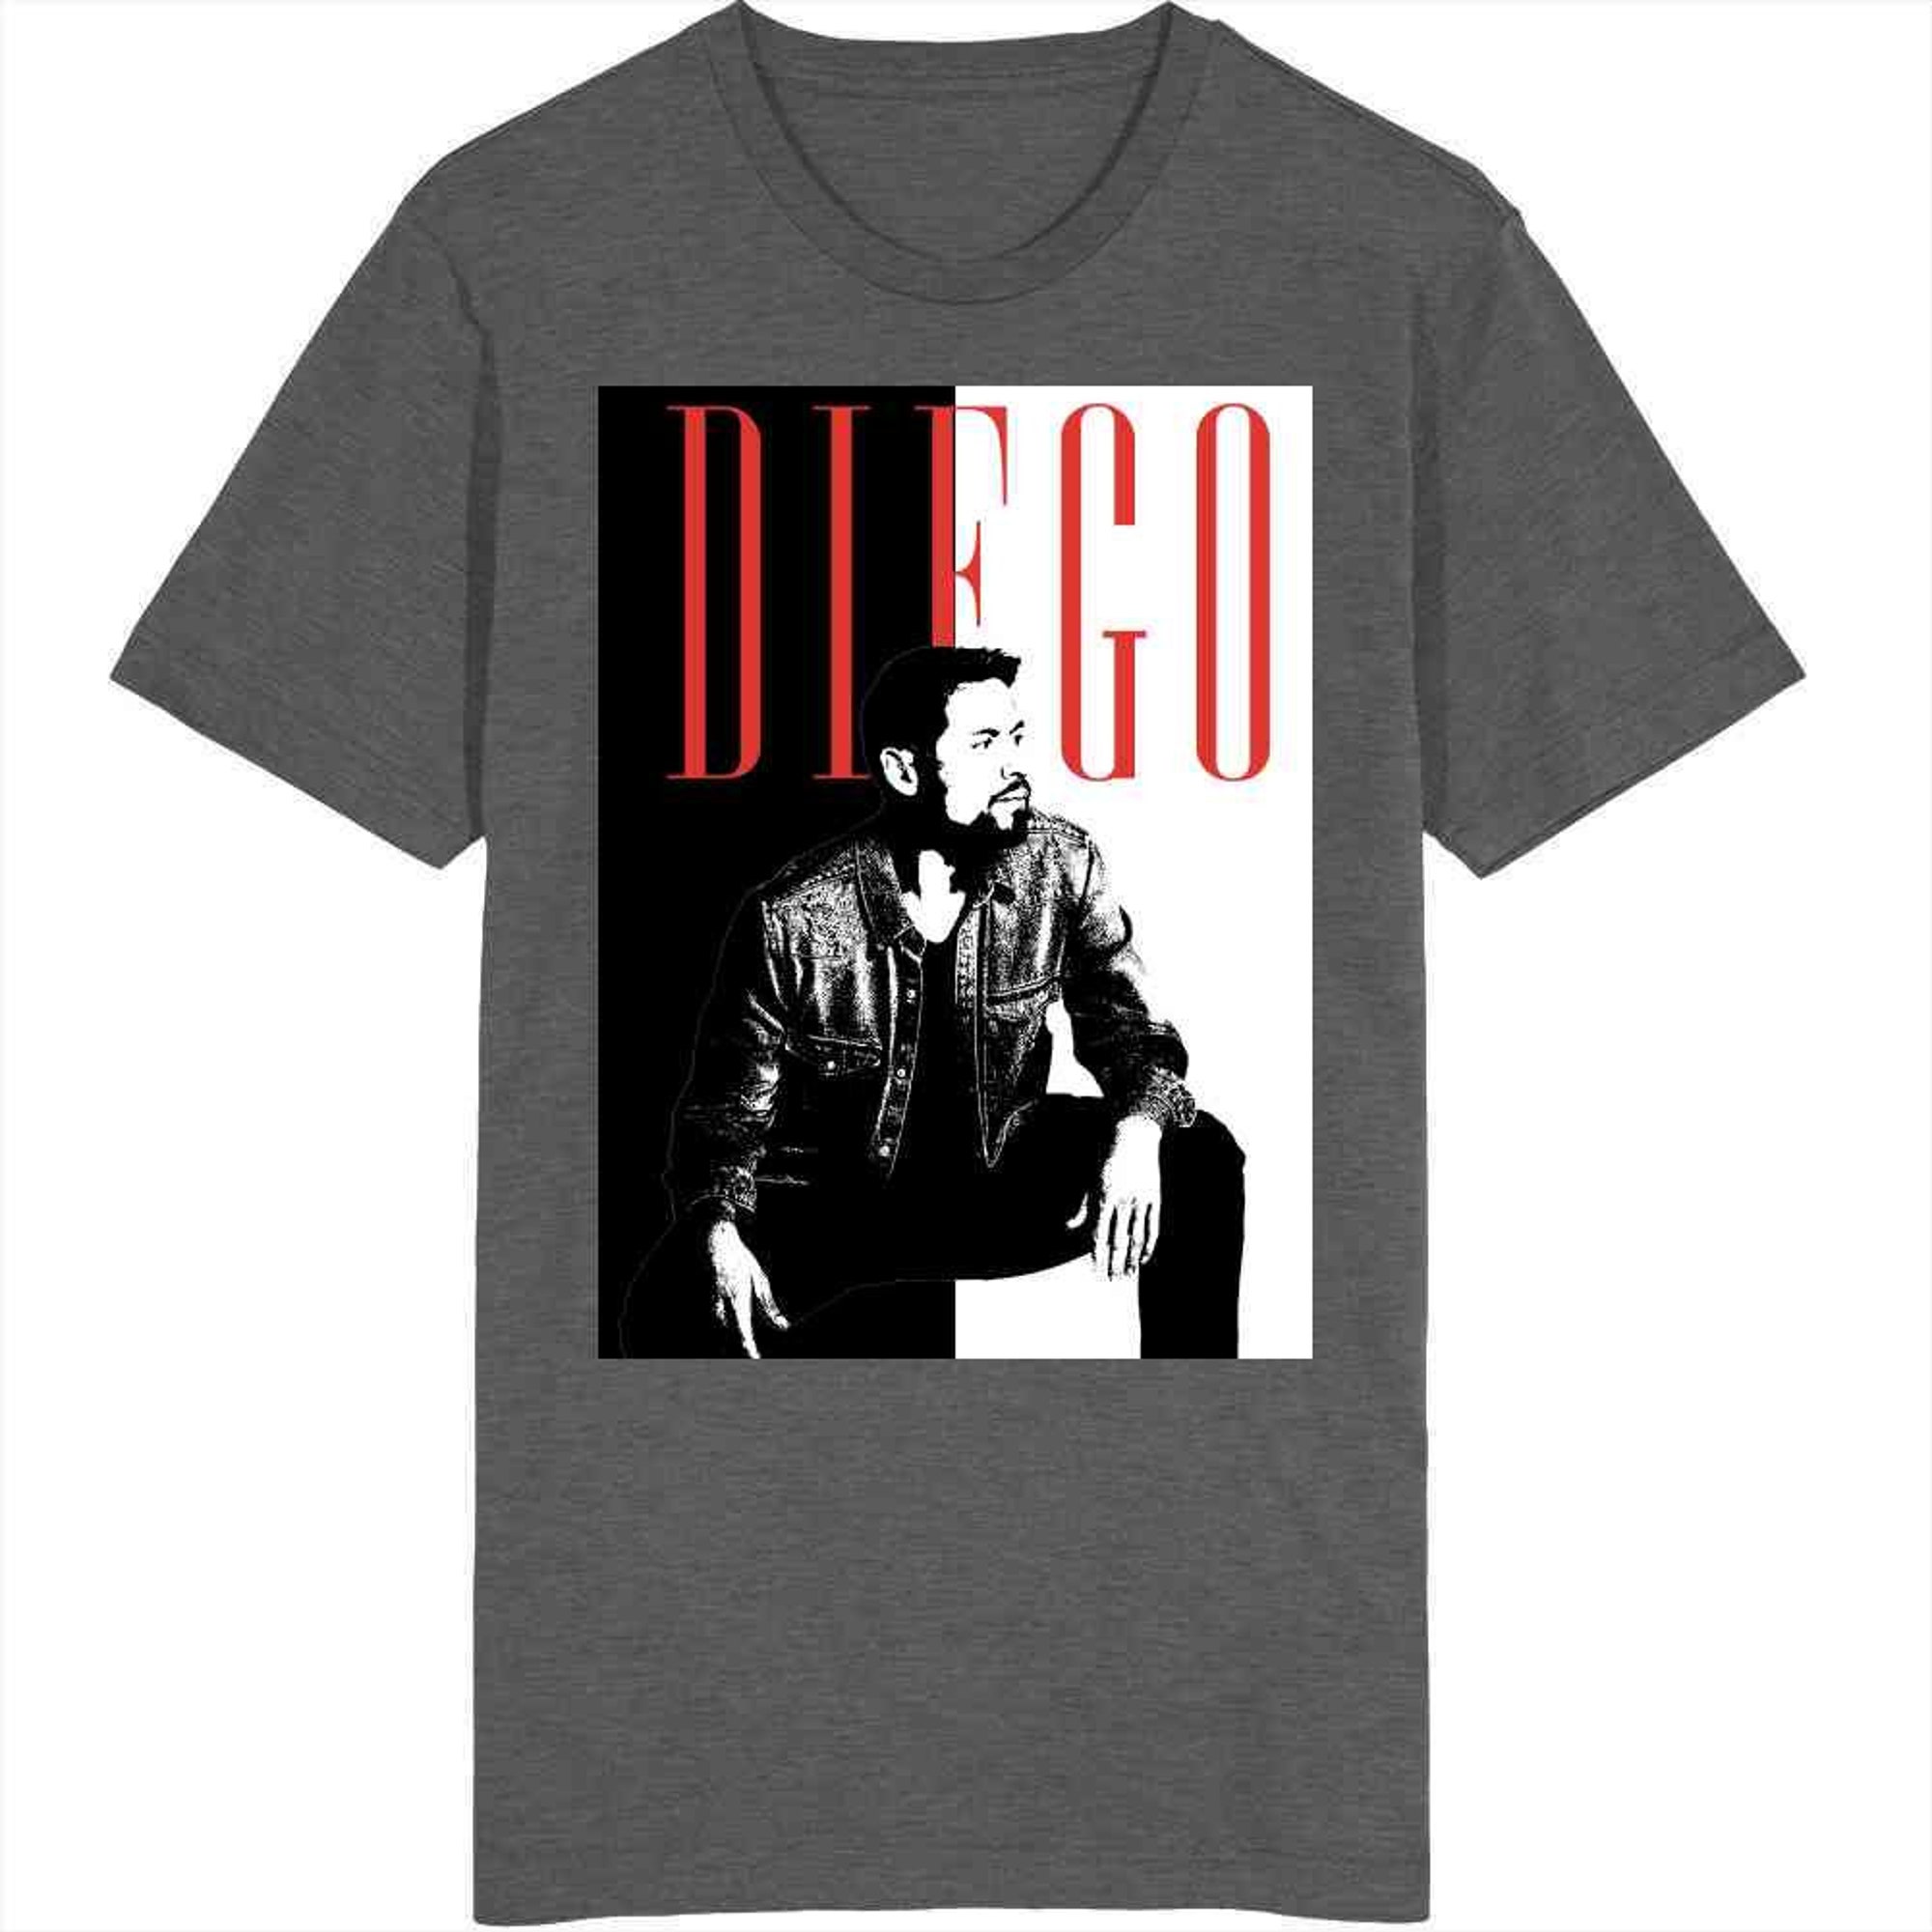 Diego Hargreeves The Umbrella Academy Scarfacce Parody T Shirt